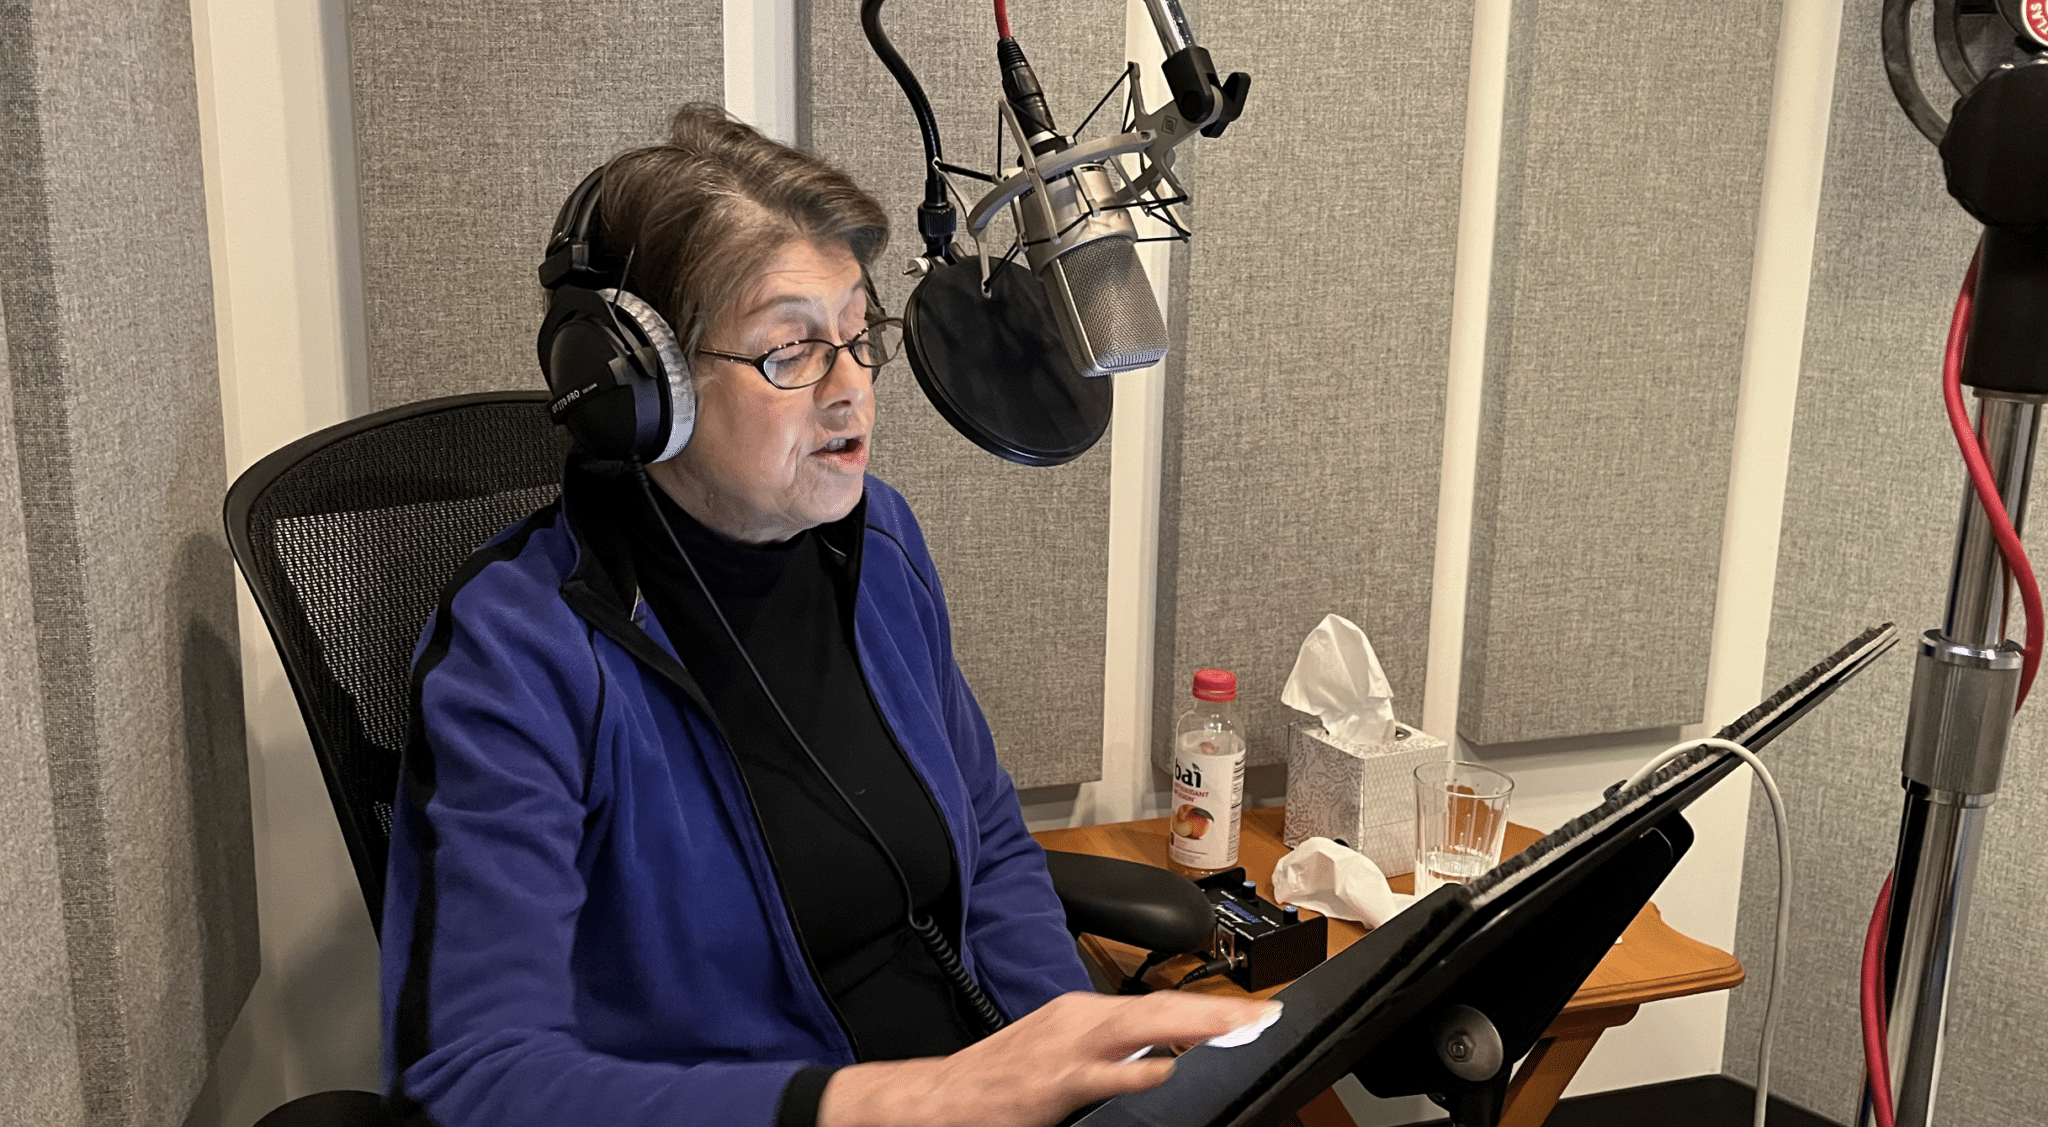 Ember Reichgott Junge has been hard at work in the studio behind a mic bringing her book to life